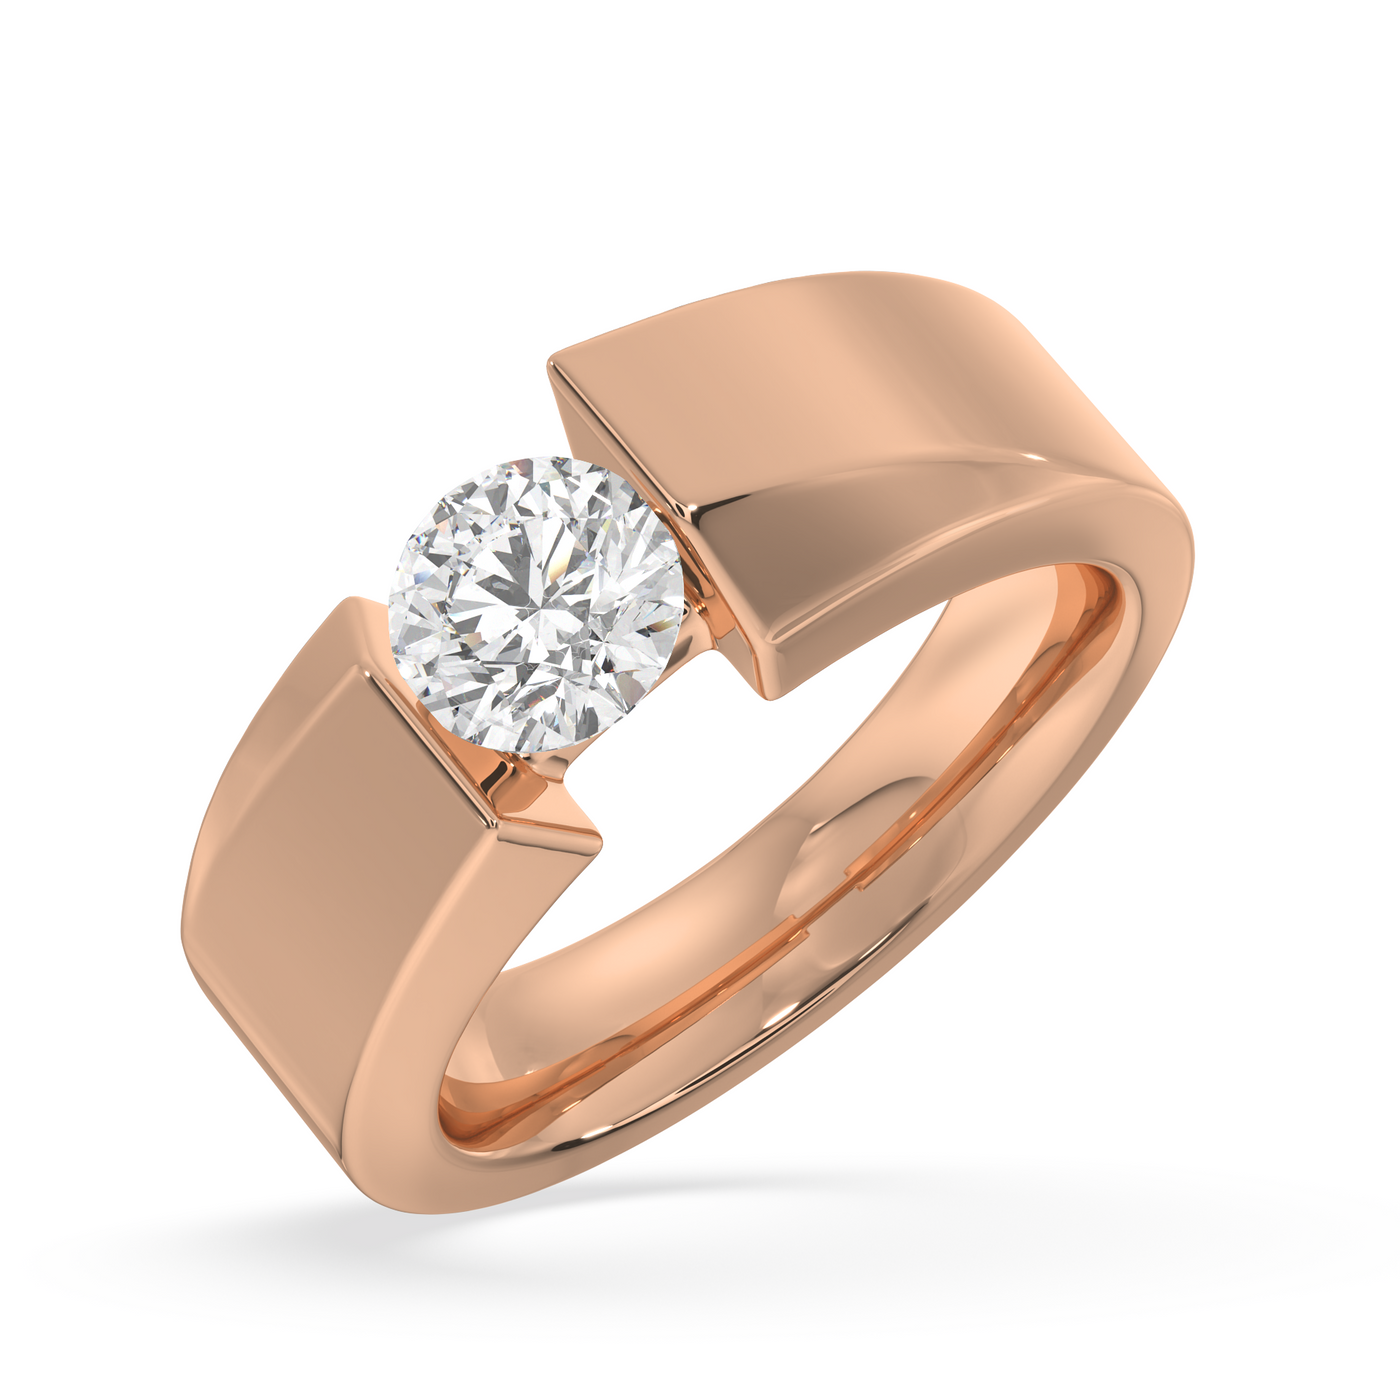 SY Men's Ring in Gold, Round Solitaire